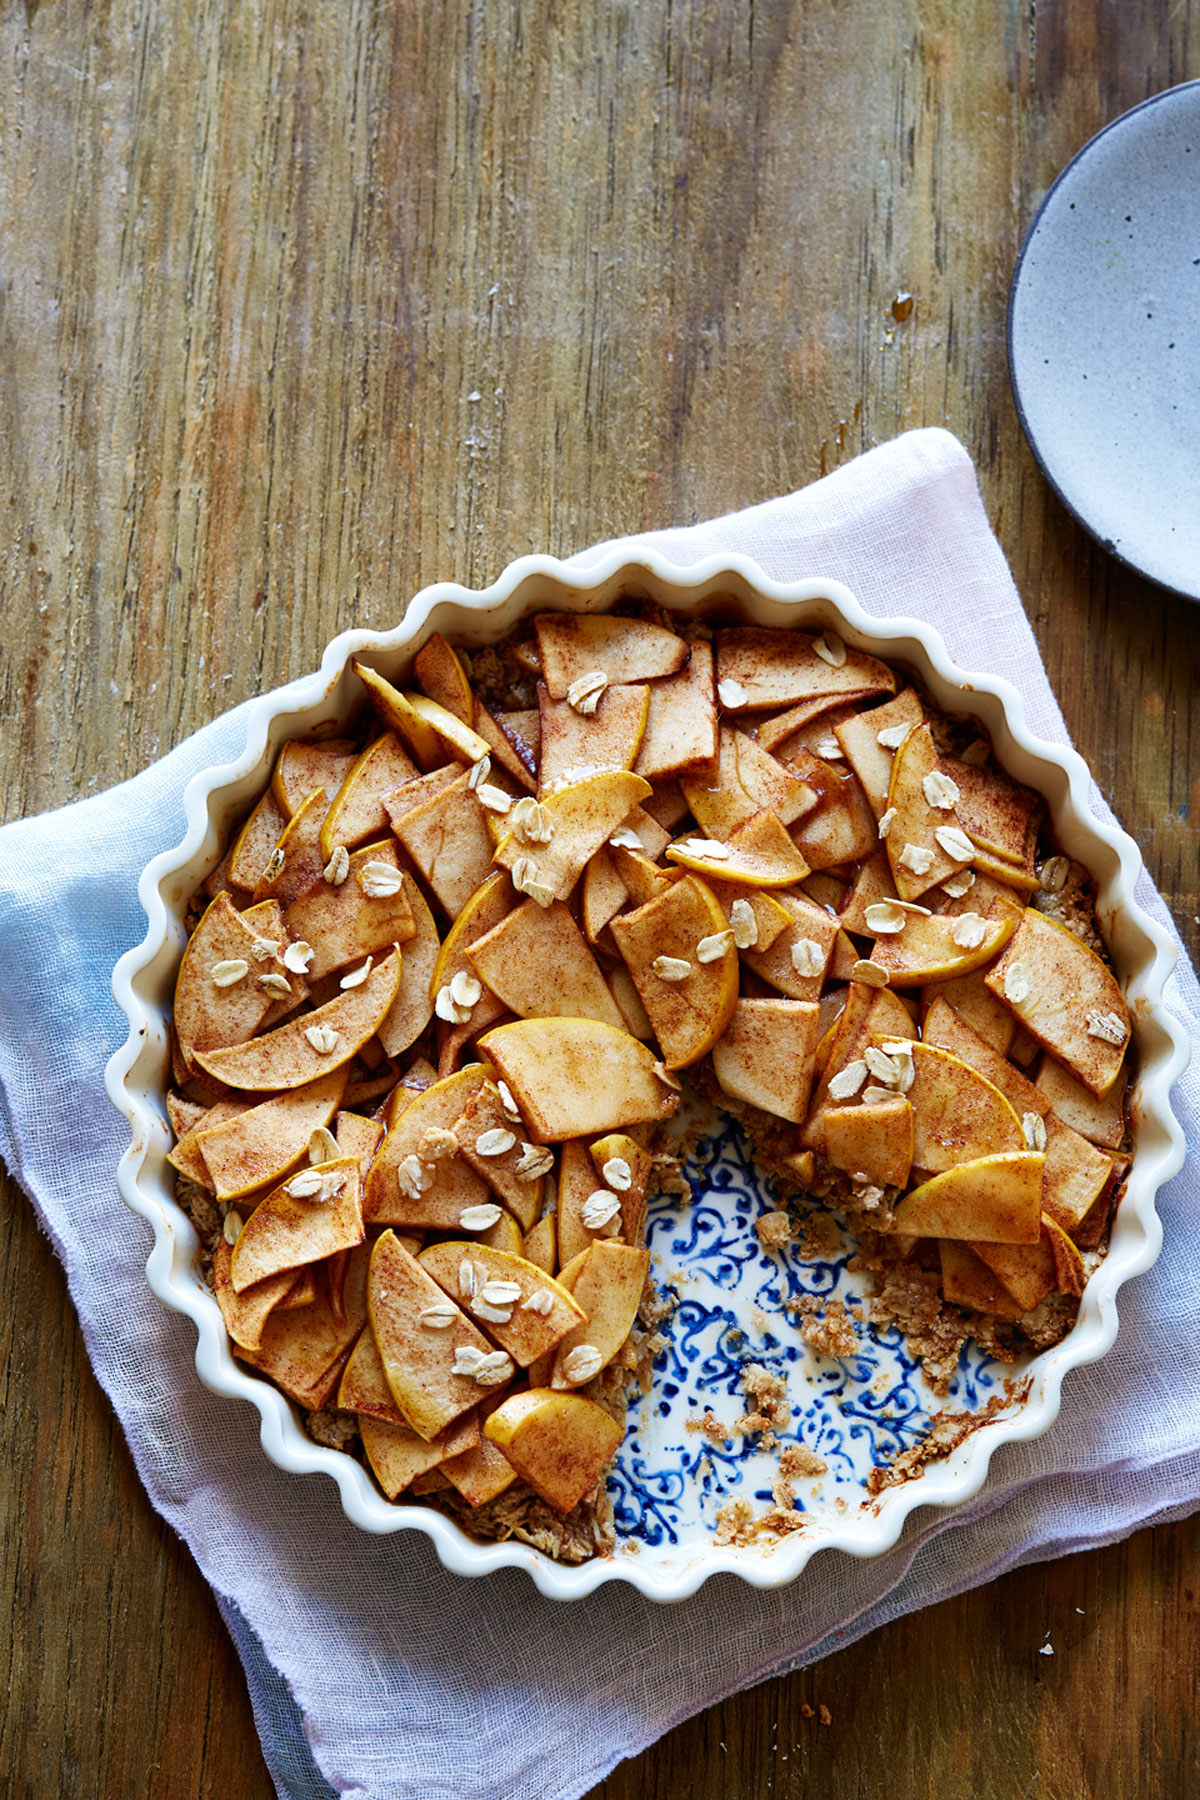 Healthy Apple Tart with Oat & Almond Crust - Camille Styles